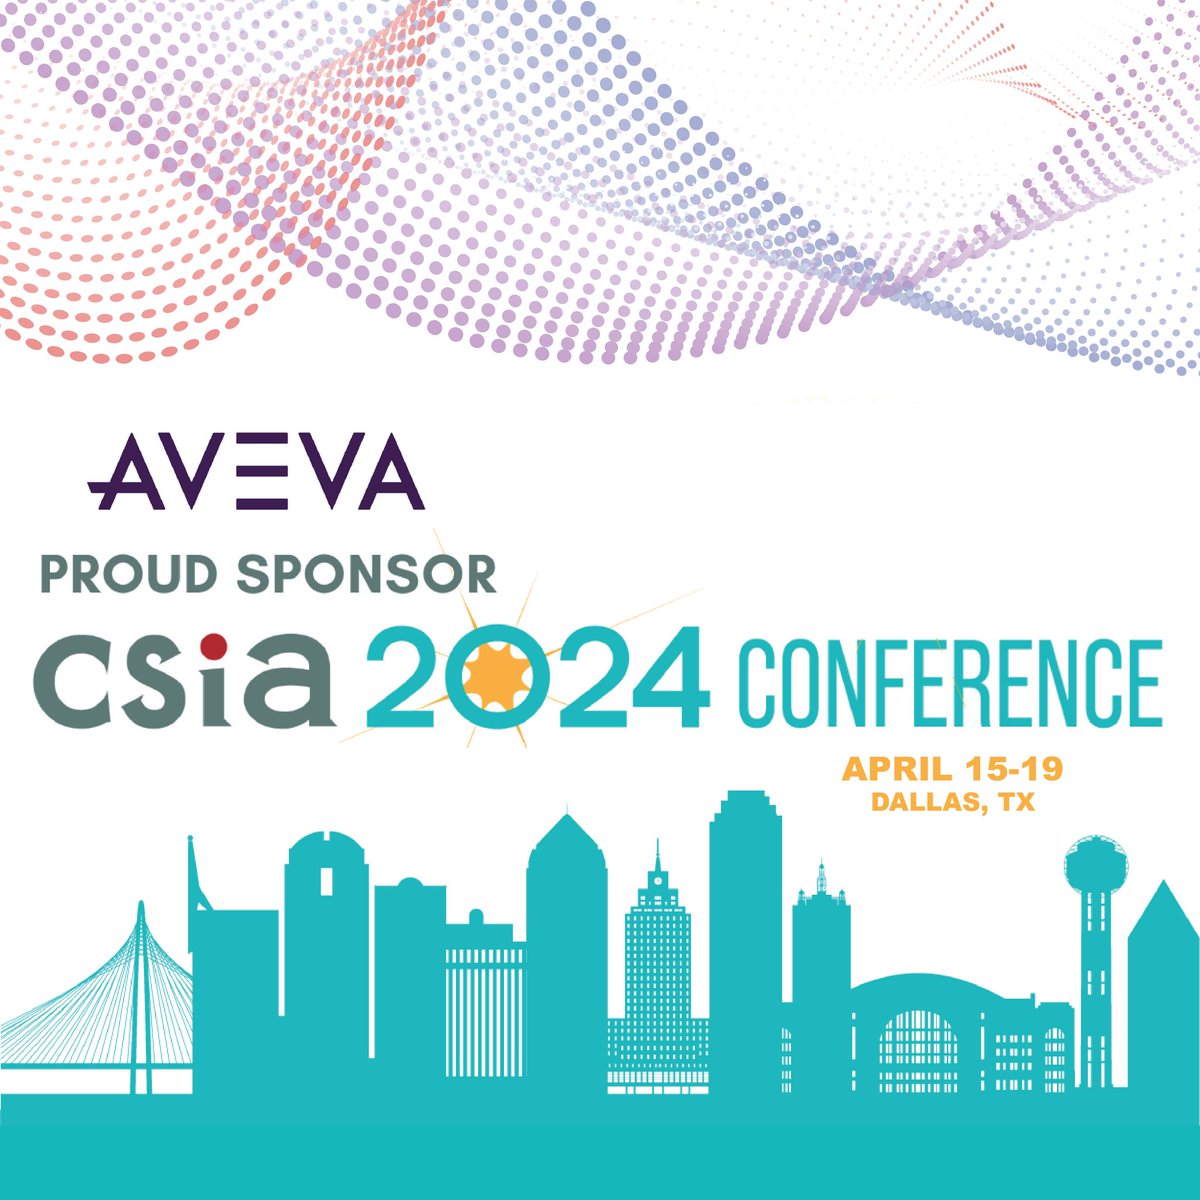 We’re excited to sponsor CSIA’s 2024 Conference, April 15-19. Join us in Dallas for a week of education and networking with system integration industry leaders. Learn more: controlsys.org/conference2024 #CSIA2024 @CSIAtweet